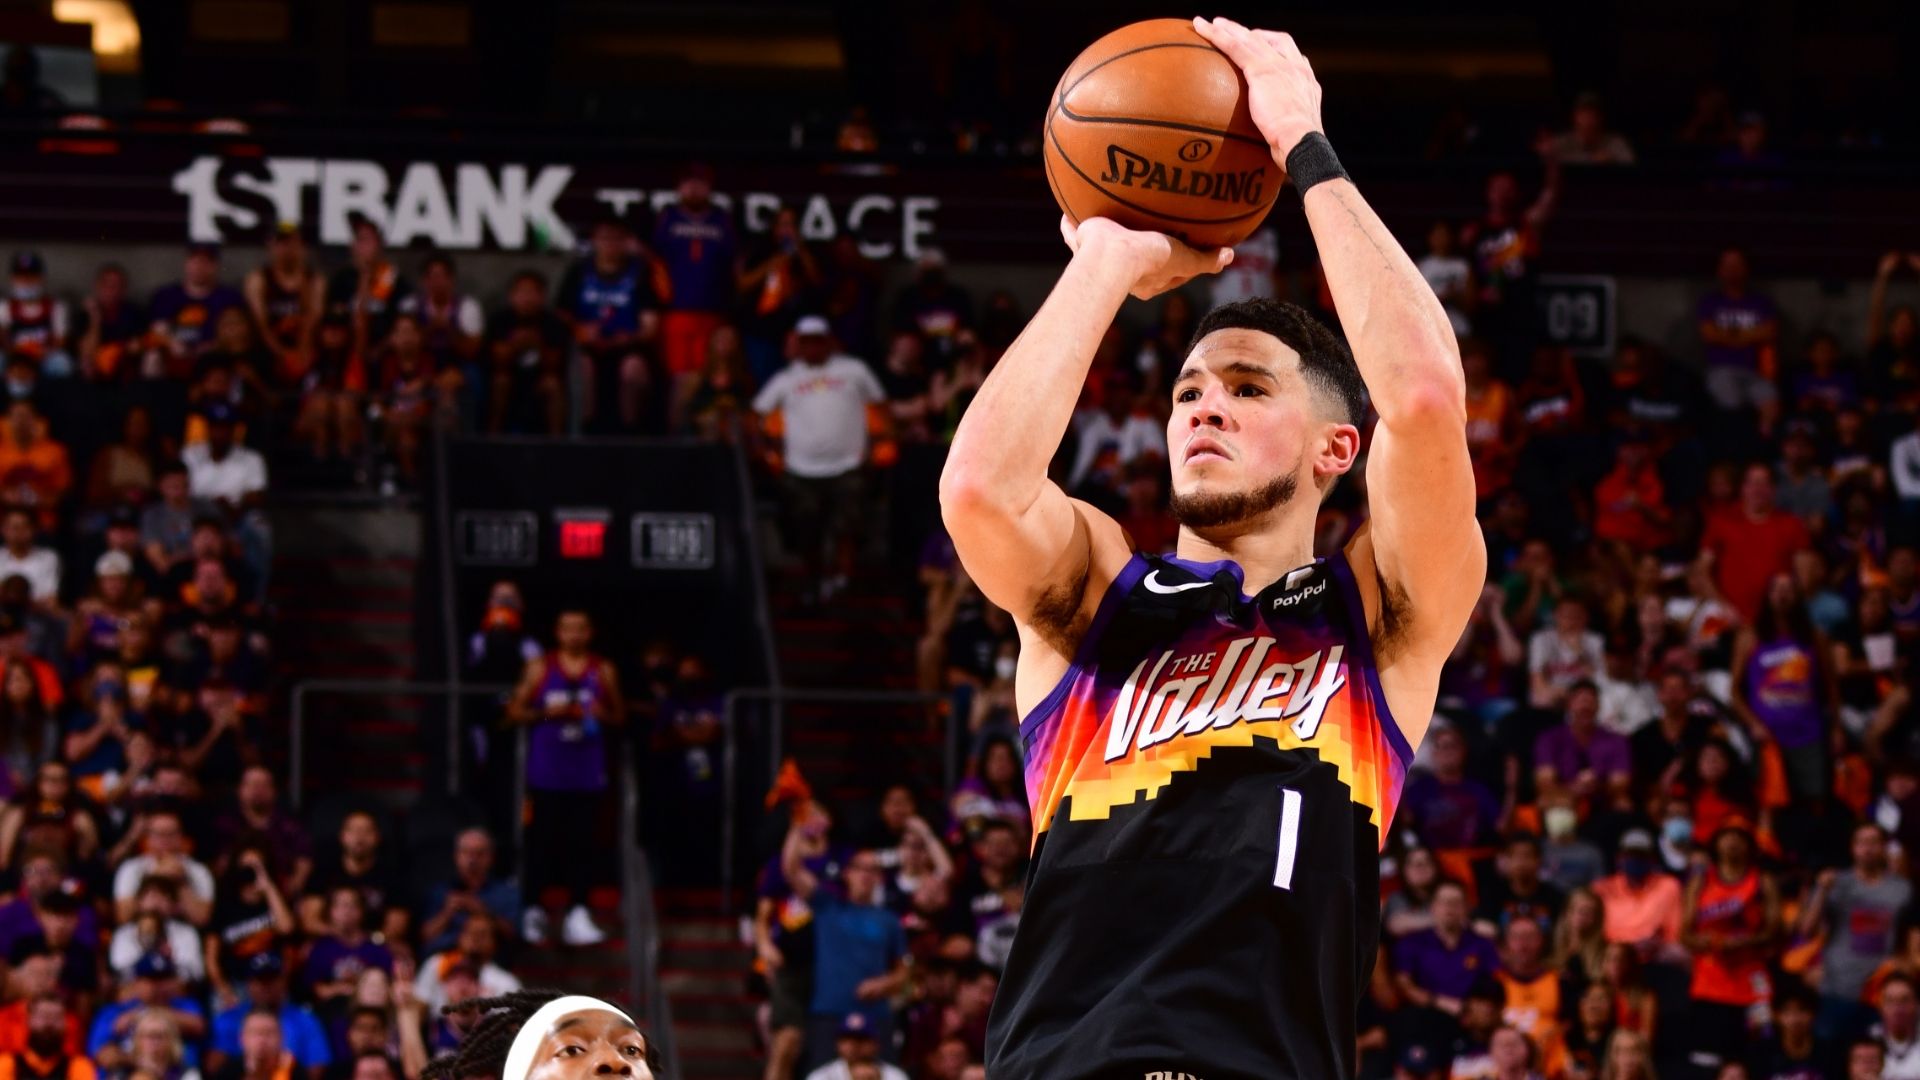 NBA Playoffs 2021: Devin Booker's First Career Triple Double Leads Phoenix Suns To Game 1 Win Over LA Clippers. NBA.com Australia. The Official Site Of